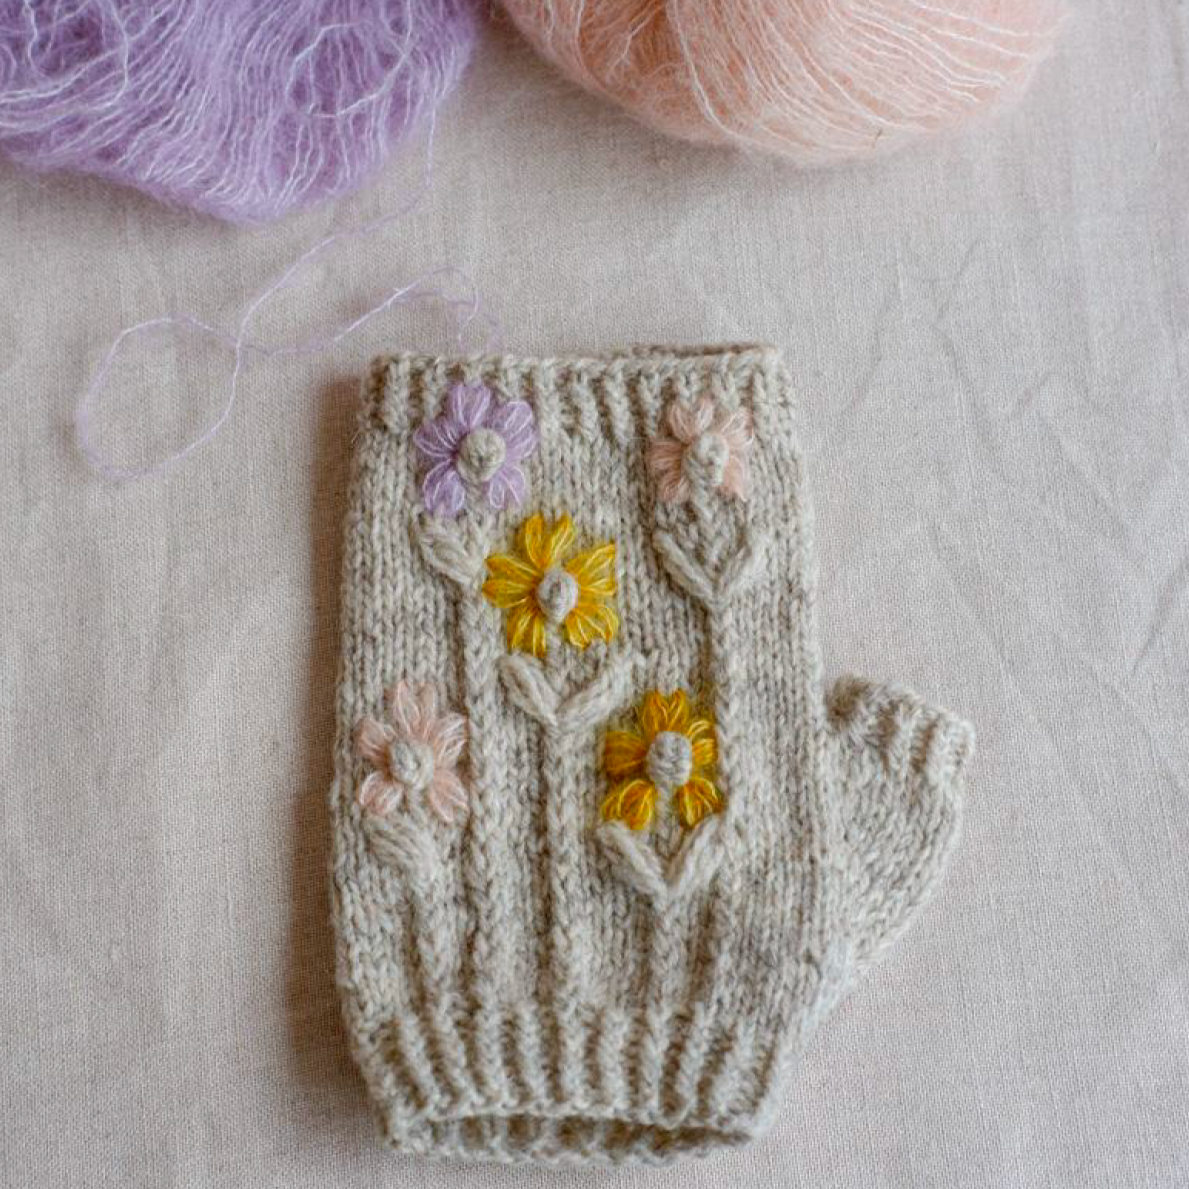 Welcome to my Garden Mittens Kit